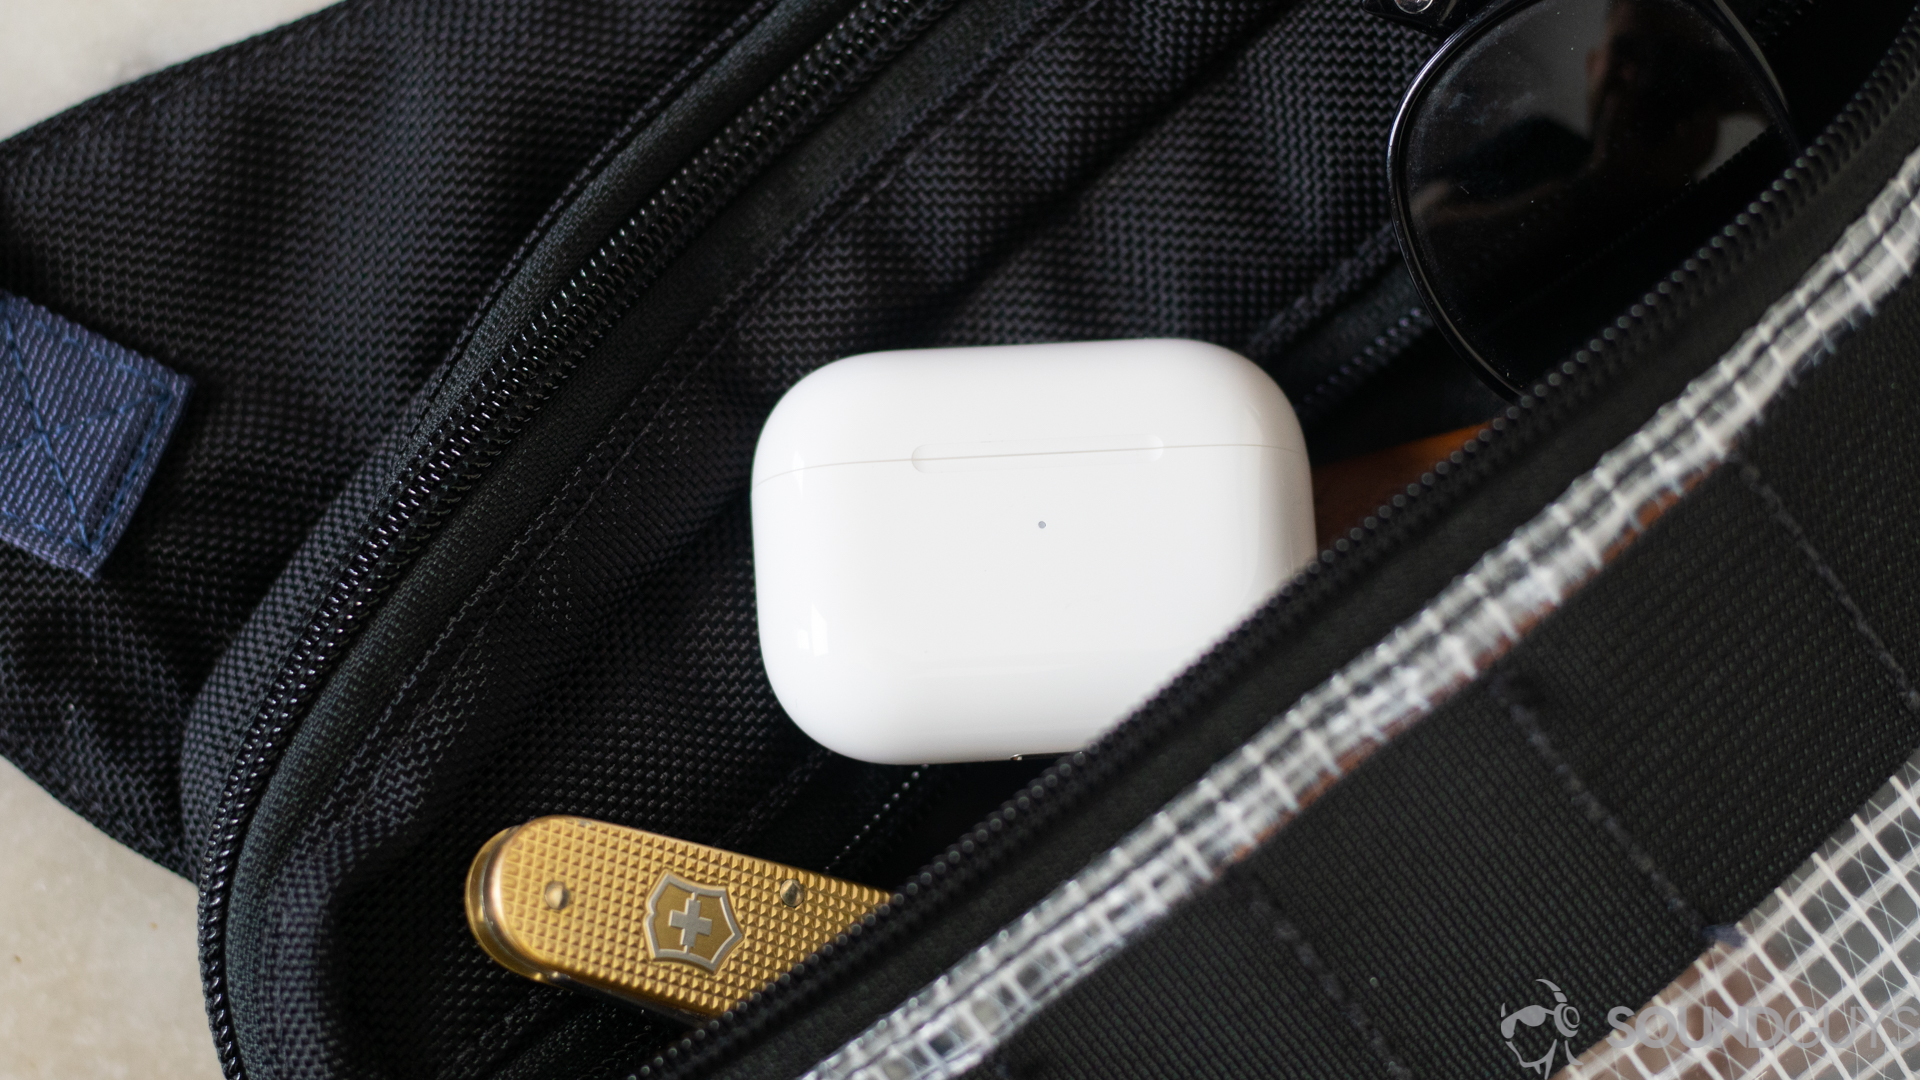 The Apple AirPods Pro charging case next to a gold swiss army knife in the pocket of a bag.